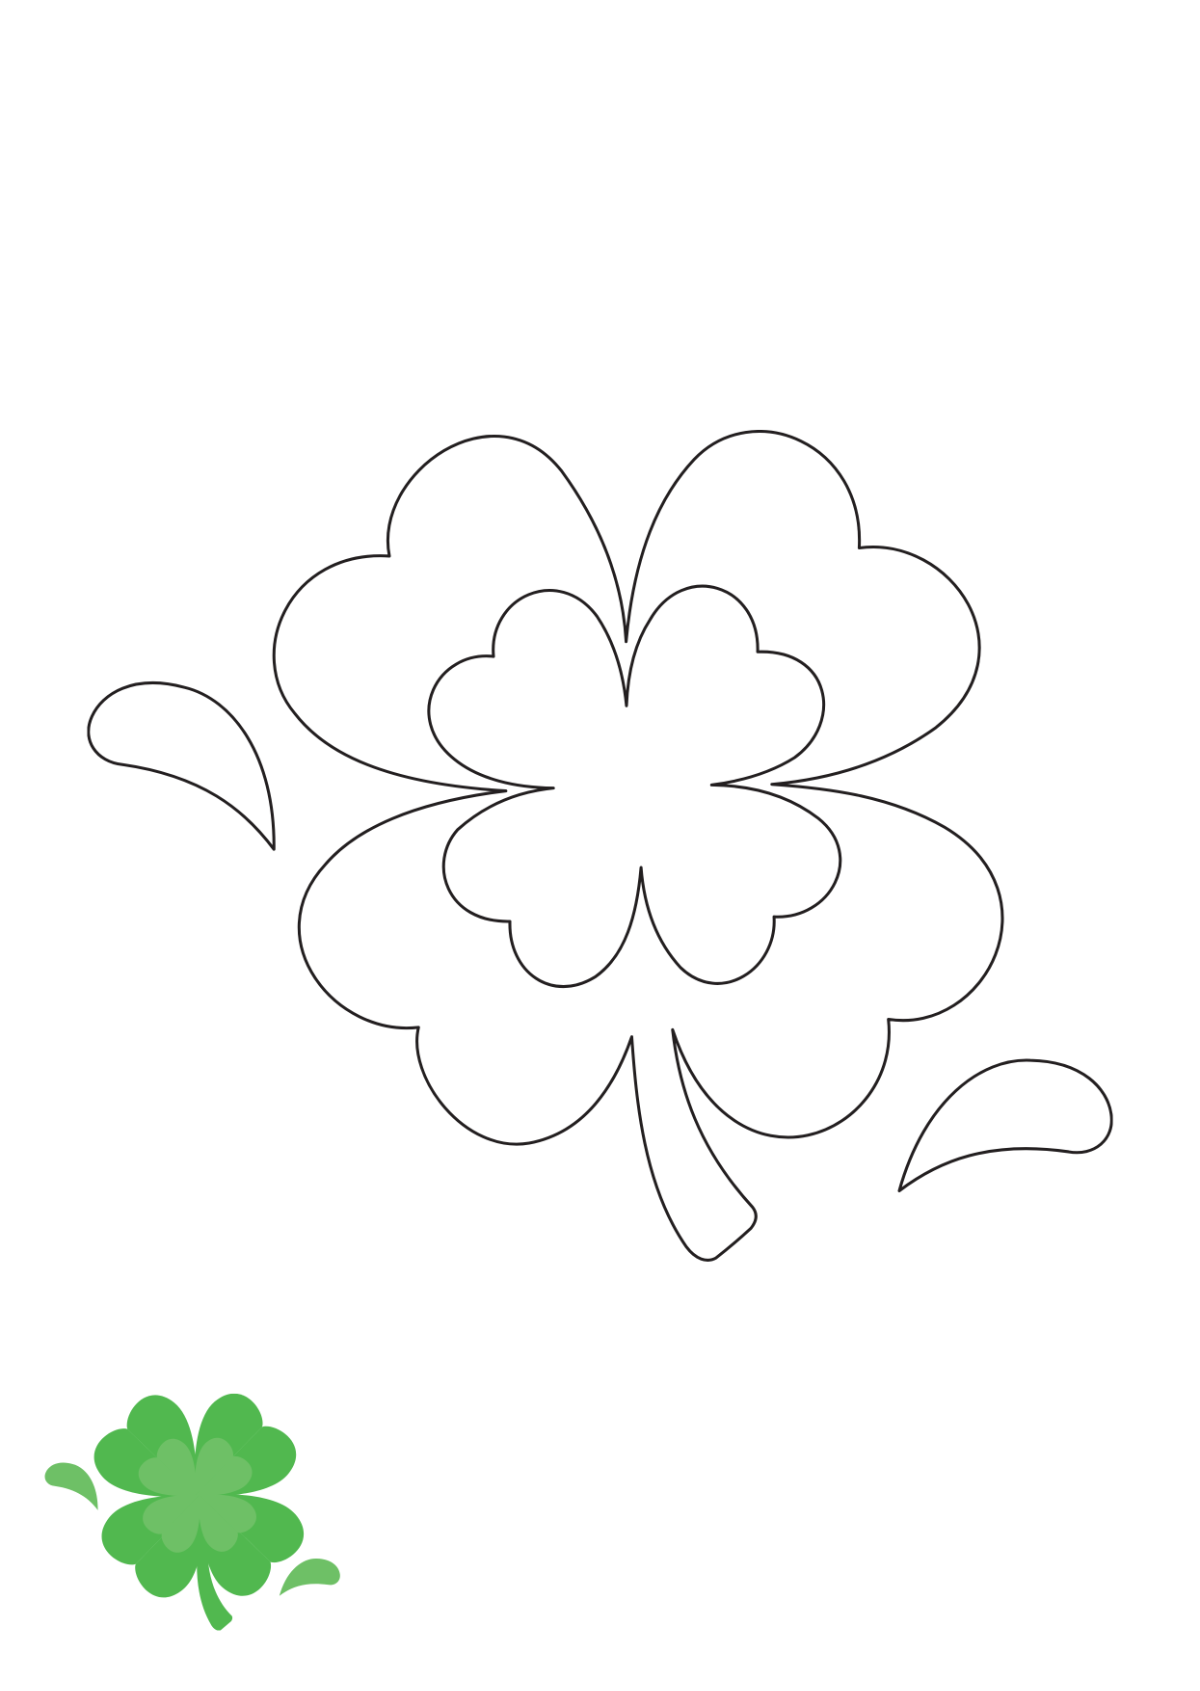 Shamrock Coloring Page Template